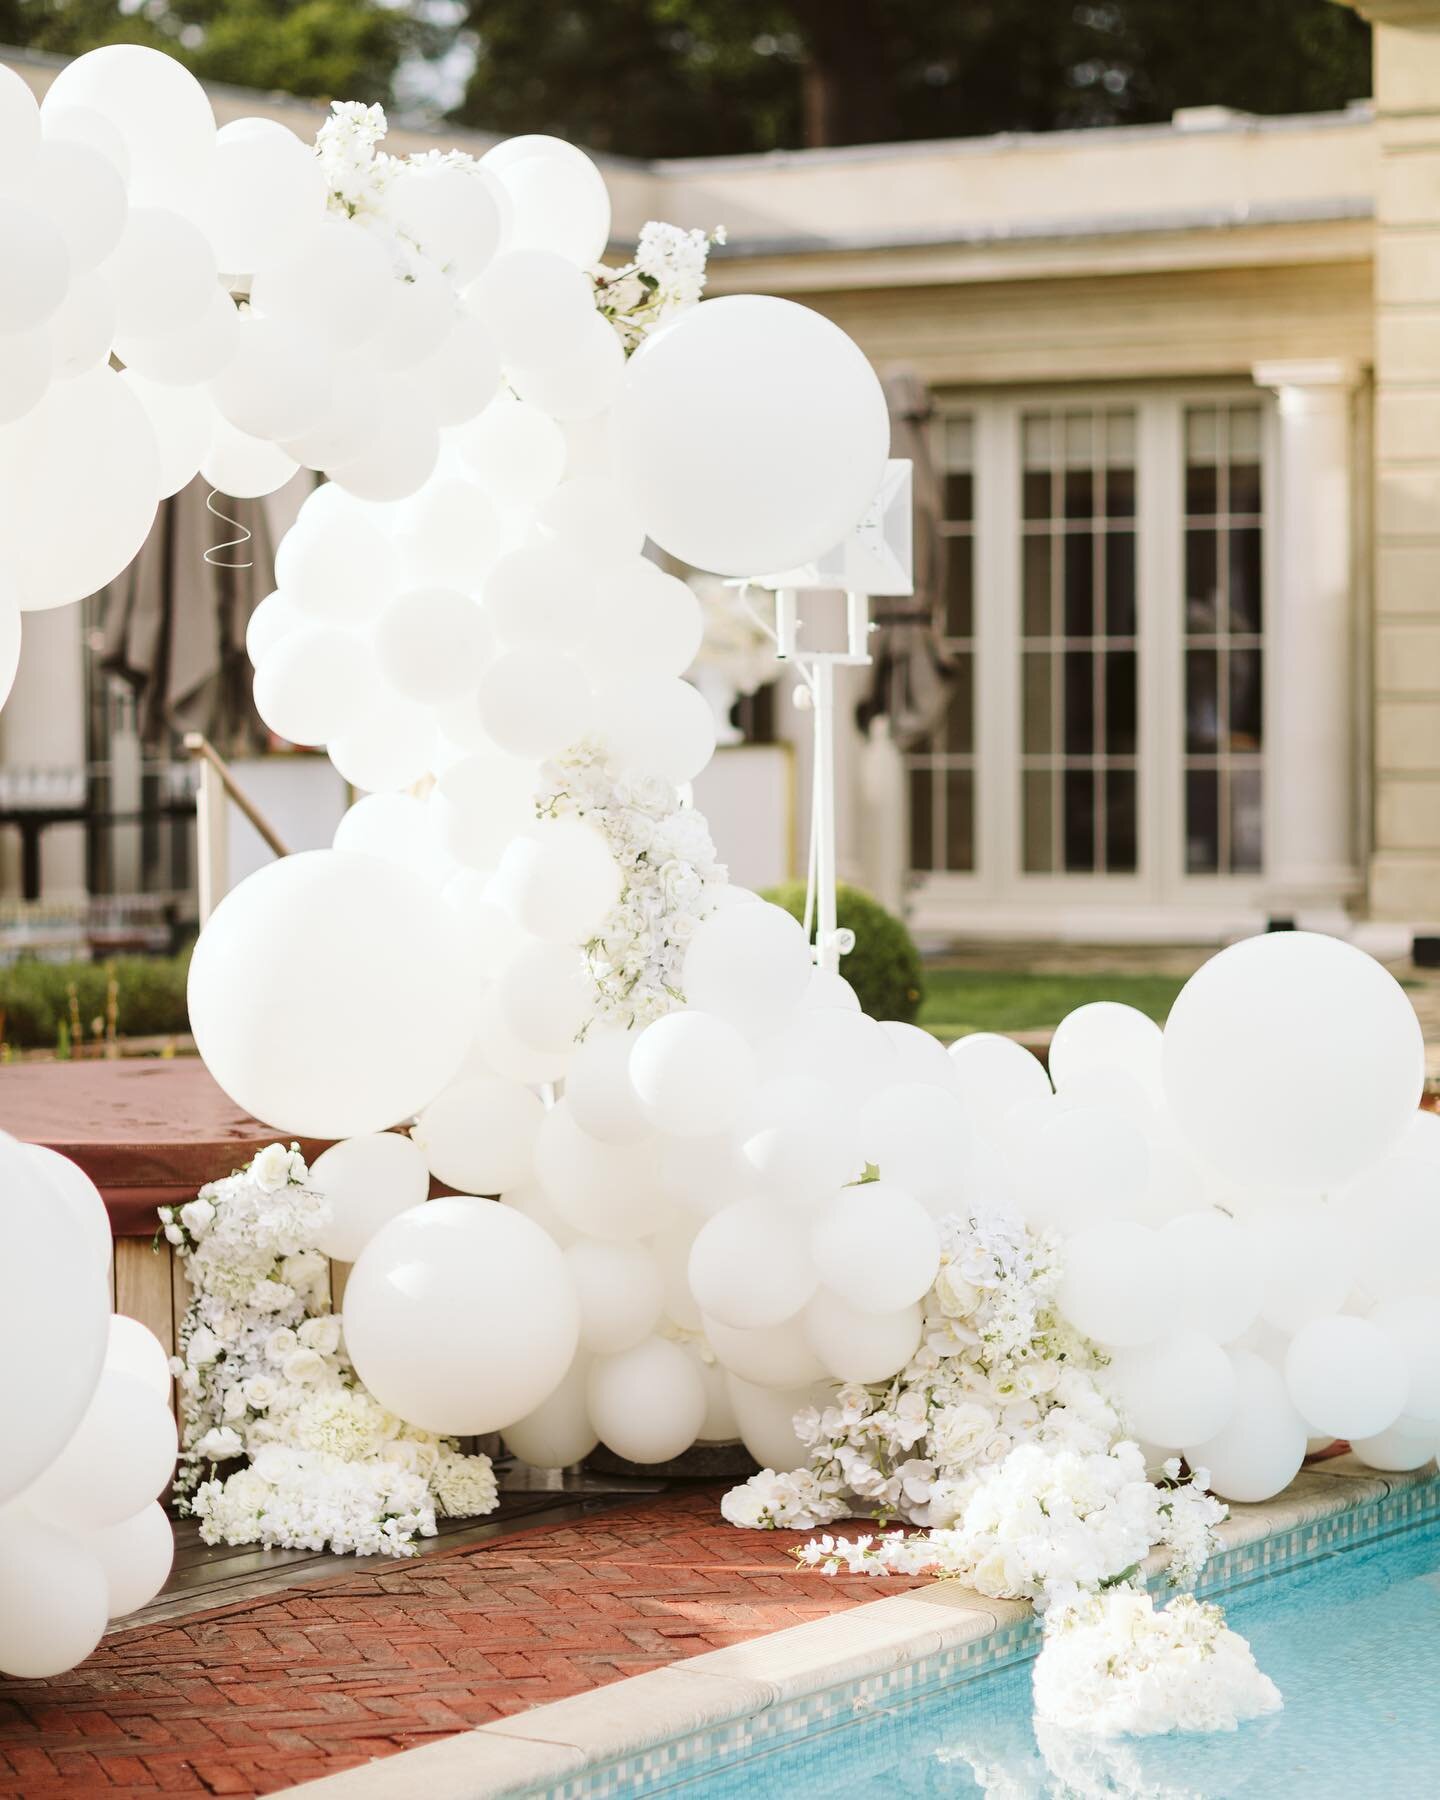 White pool party with amazing balloon arch by @elari_events 🤍

Location: Clivedenhouse
Photographer @moment_studio 
Gorgeous flowers by @wildaboutflower 
Wedding planner and designer: GLENNE Luxury Weddings &amp; Events

#glenne#clivedenhouse#clived